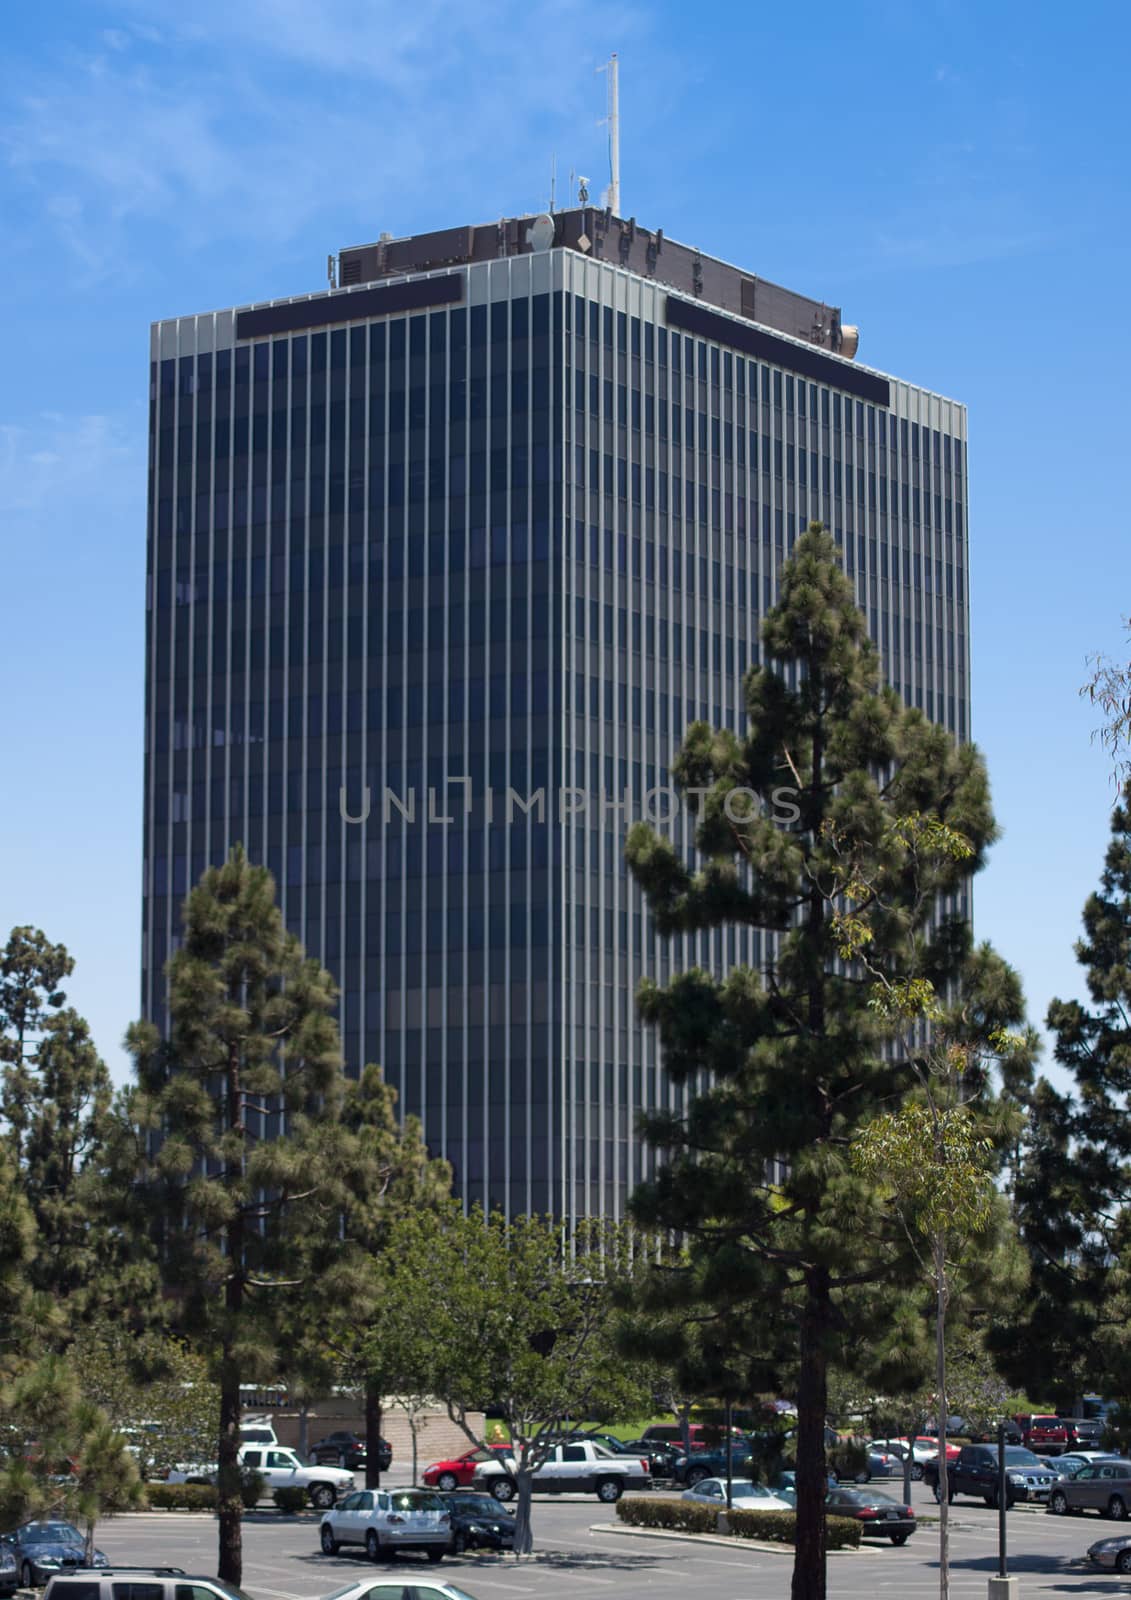 A multi floored office building with verticle lines is the primnary focus of this photo. The skyscraper has pine trees and a parking lot in the foreground.